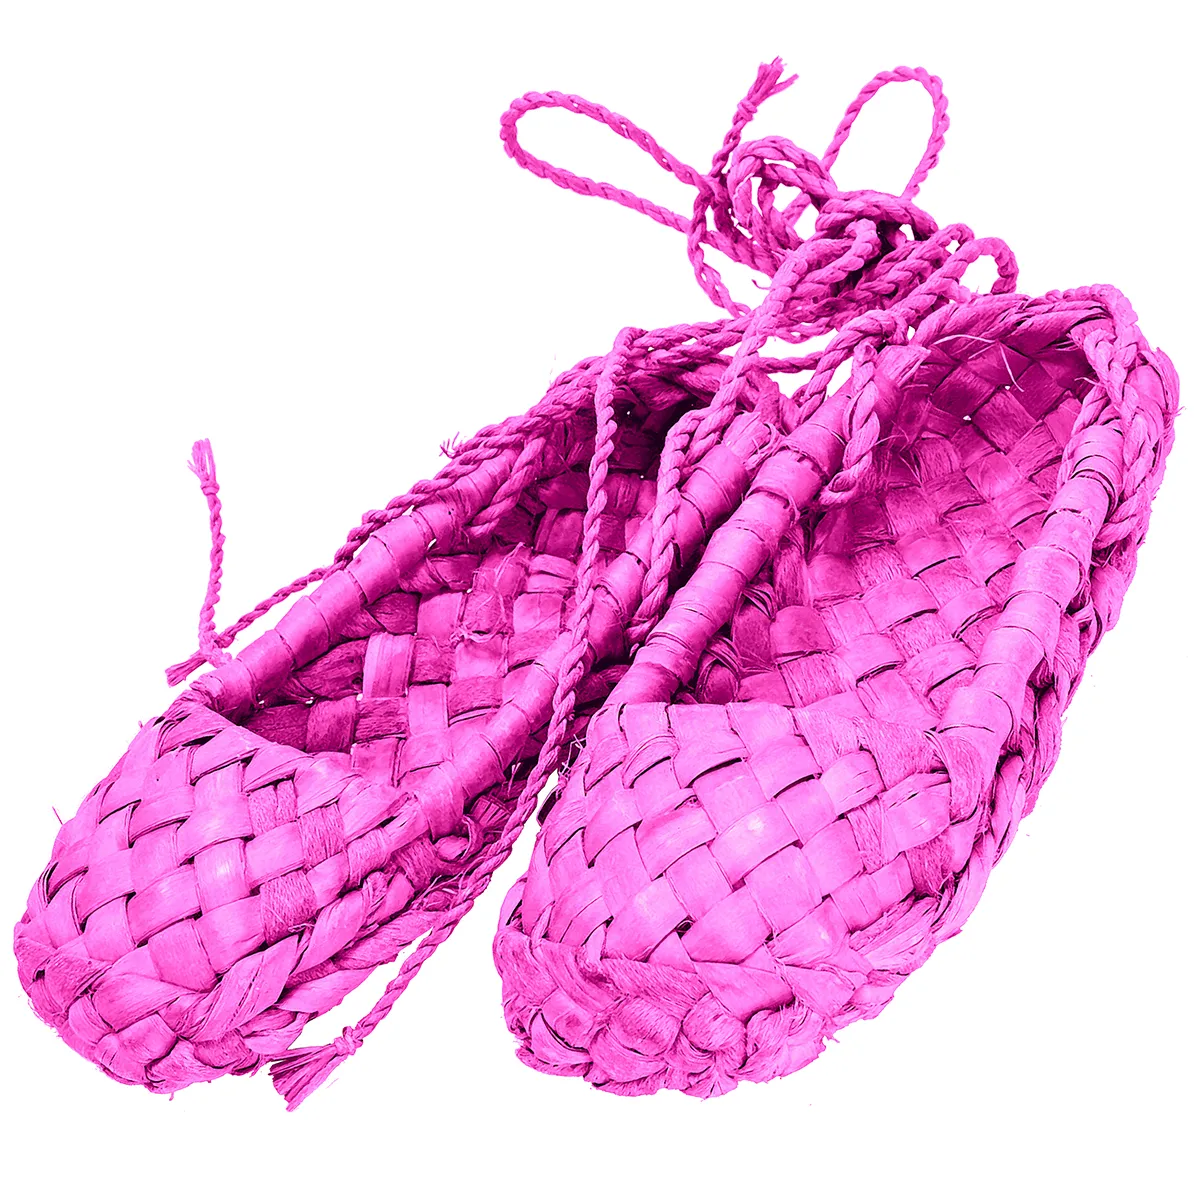 Print from contemporary artist Vladimir Tsesler - Pink Bast Shoes. The Lapti. For sale.